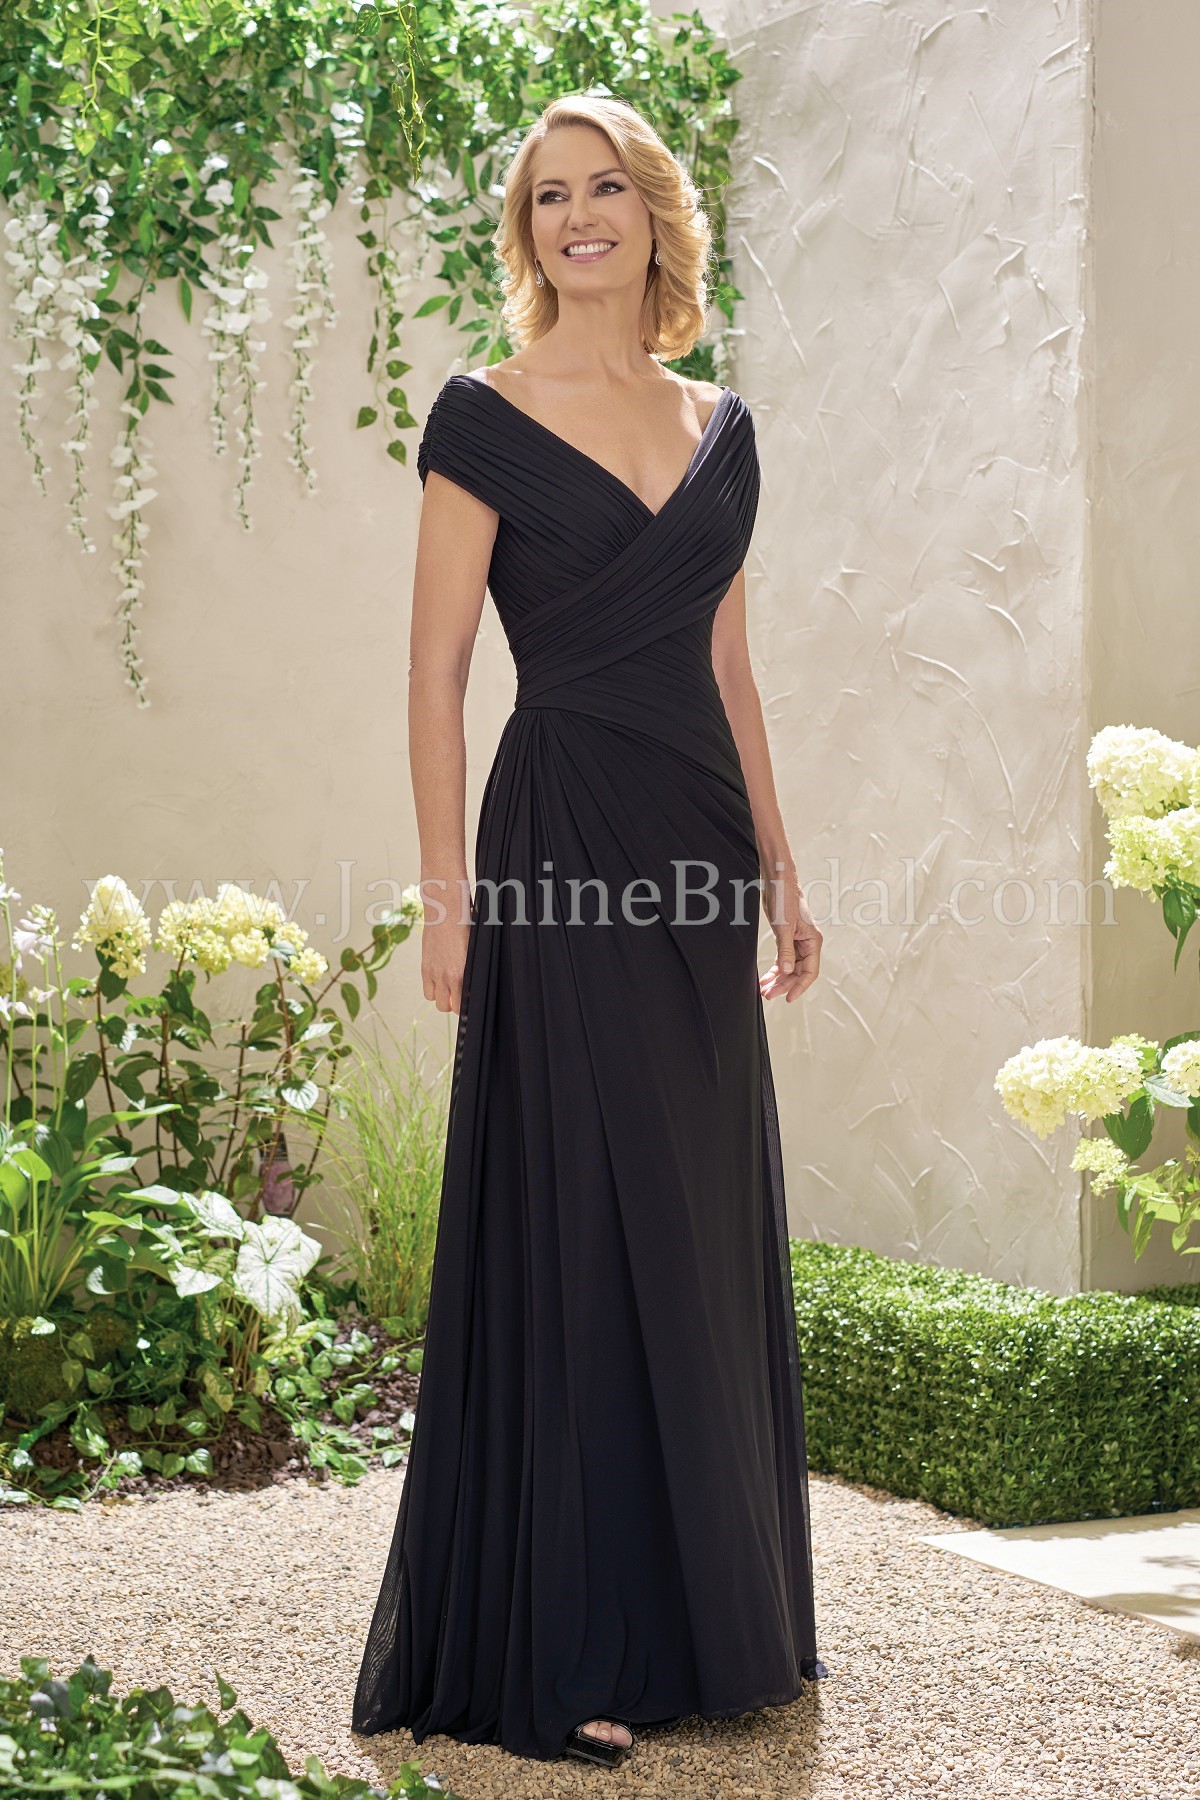 jade couture mother of the bride dress gallery